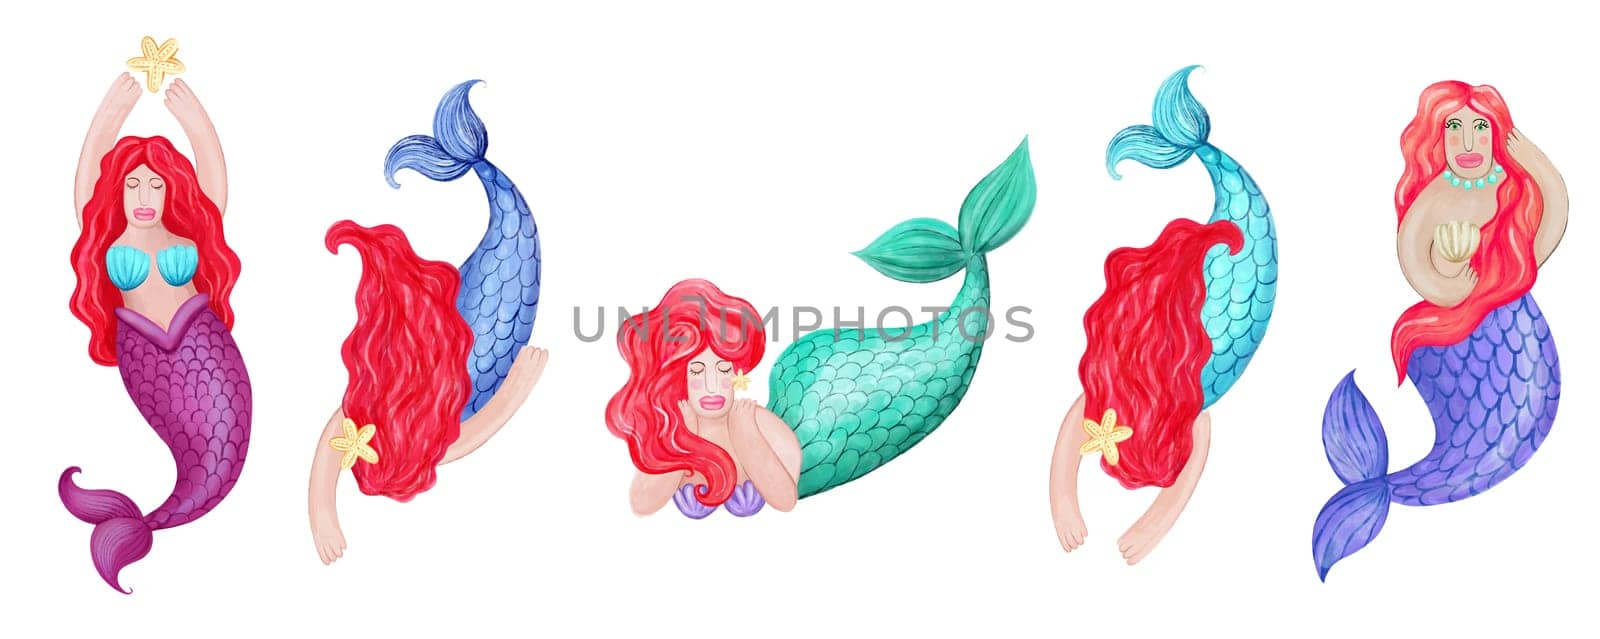 Set of colorful cartoon mermaids. watercolor illustration by Dustick